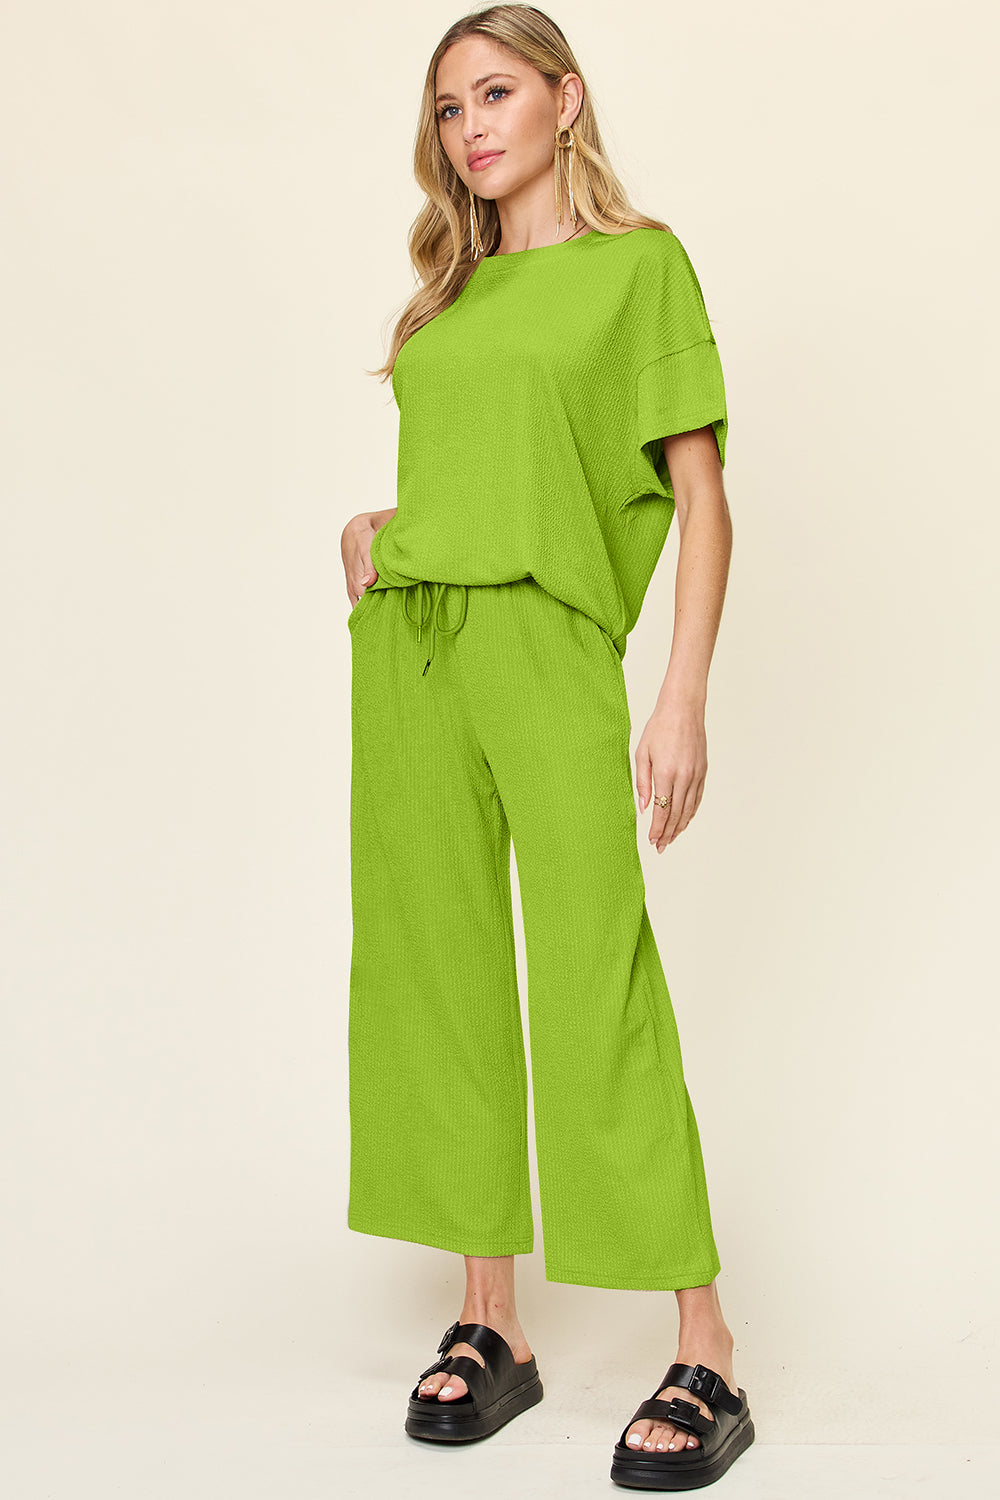 Textured Knit Top and Wide Leg Pant Set